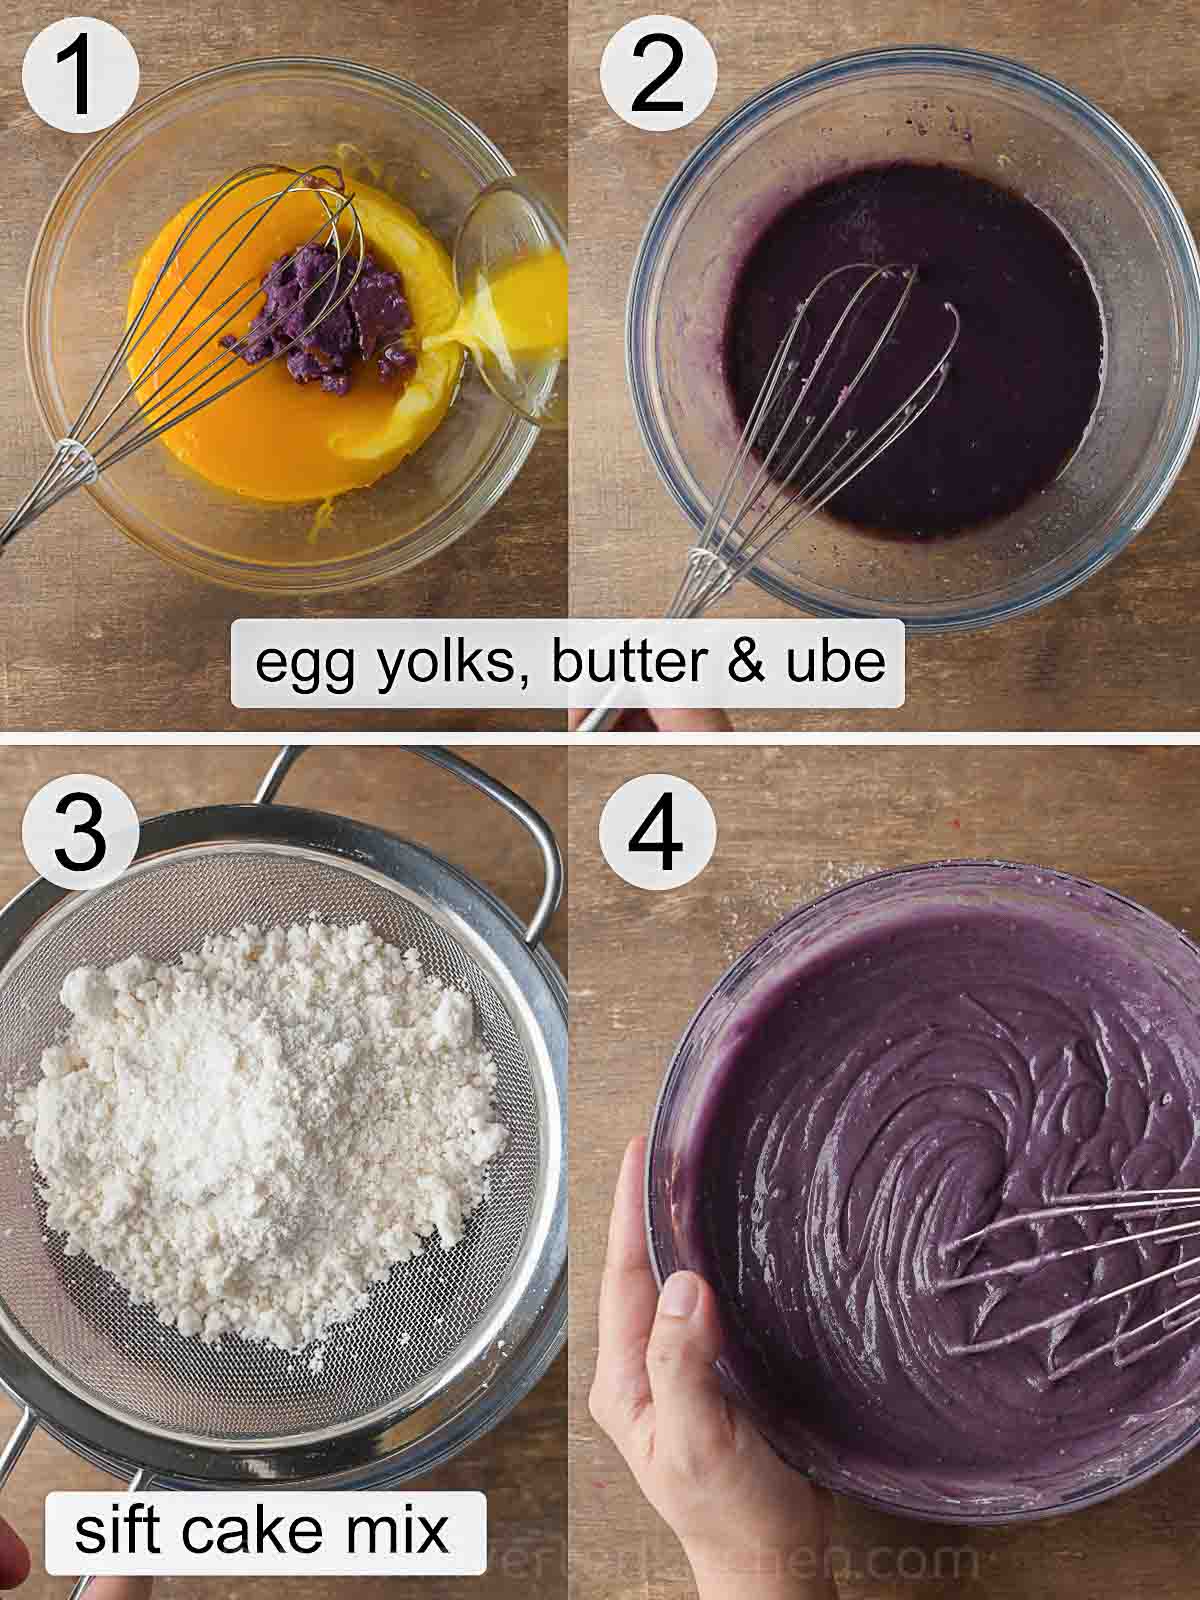 step-by-step process on how to make ube cake using cake mix.